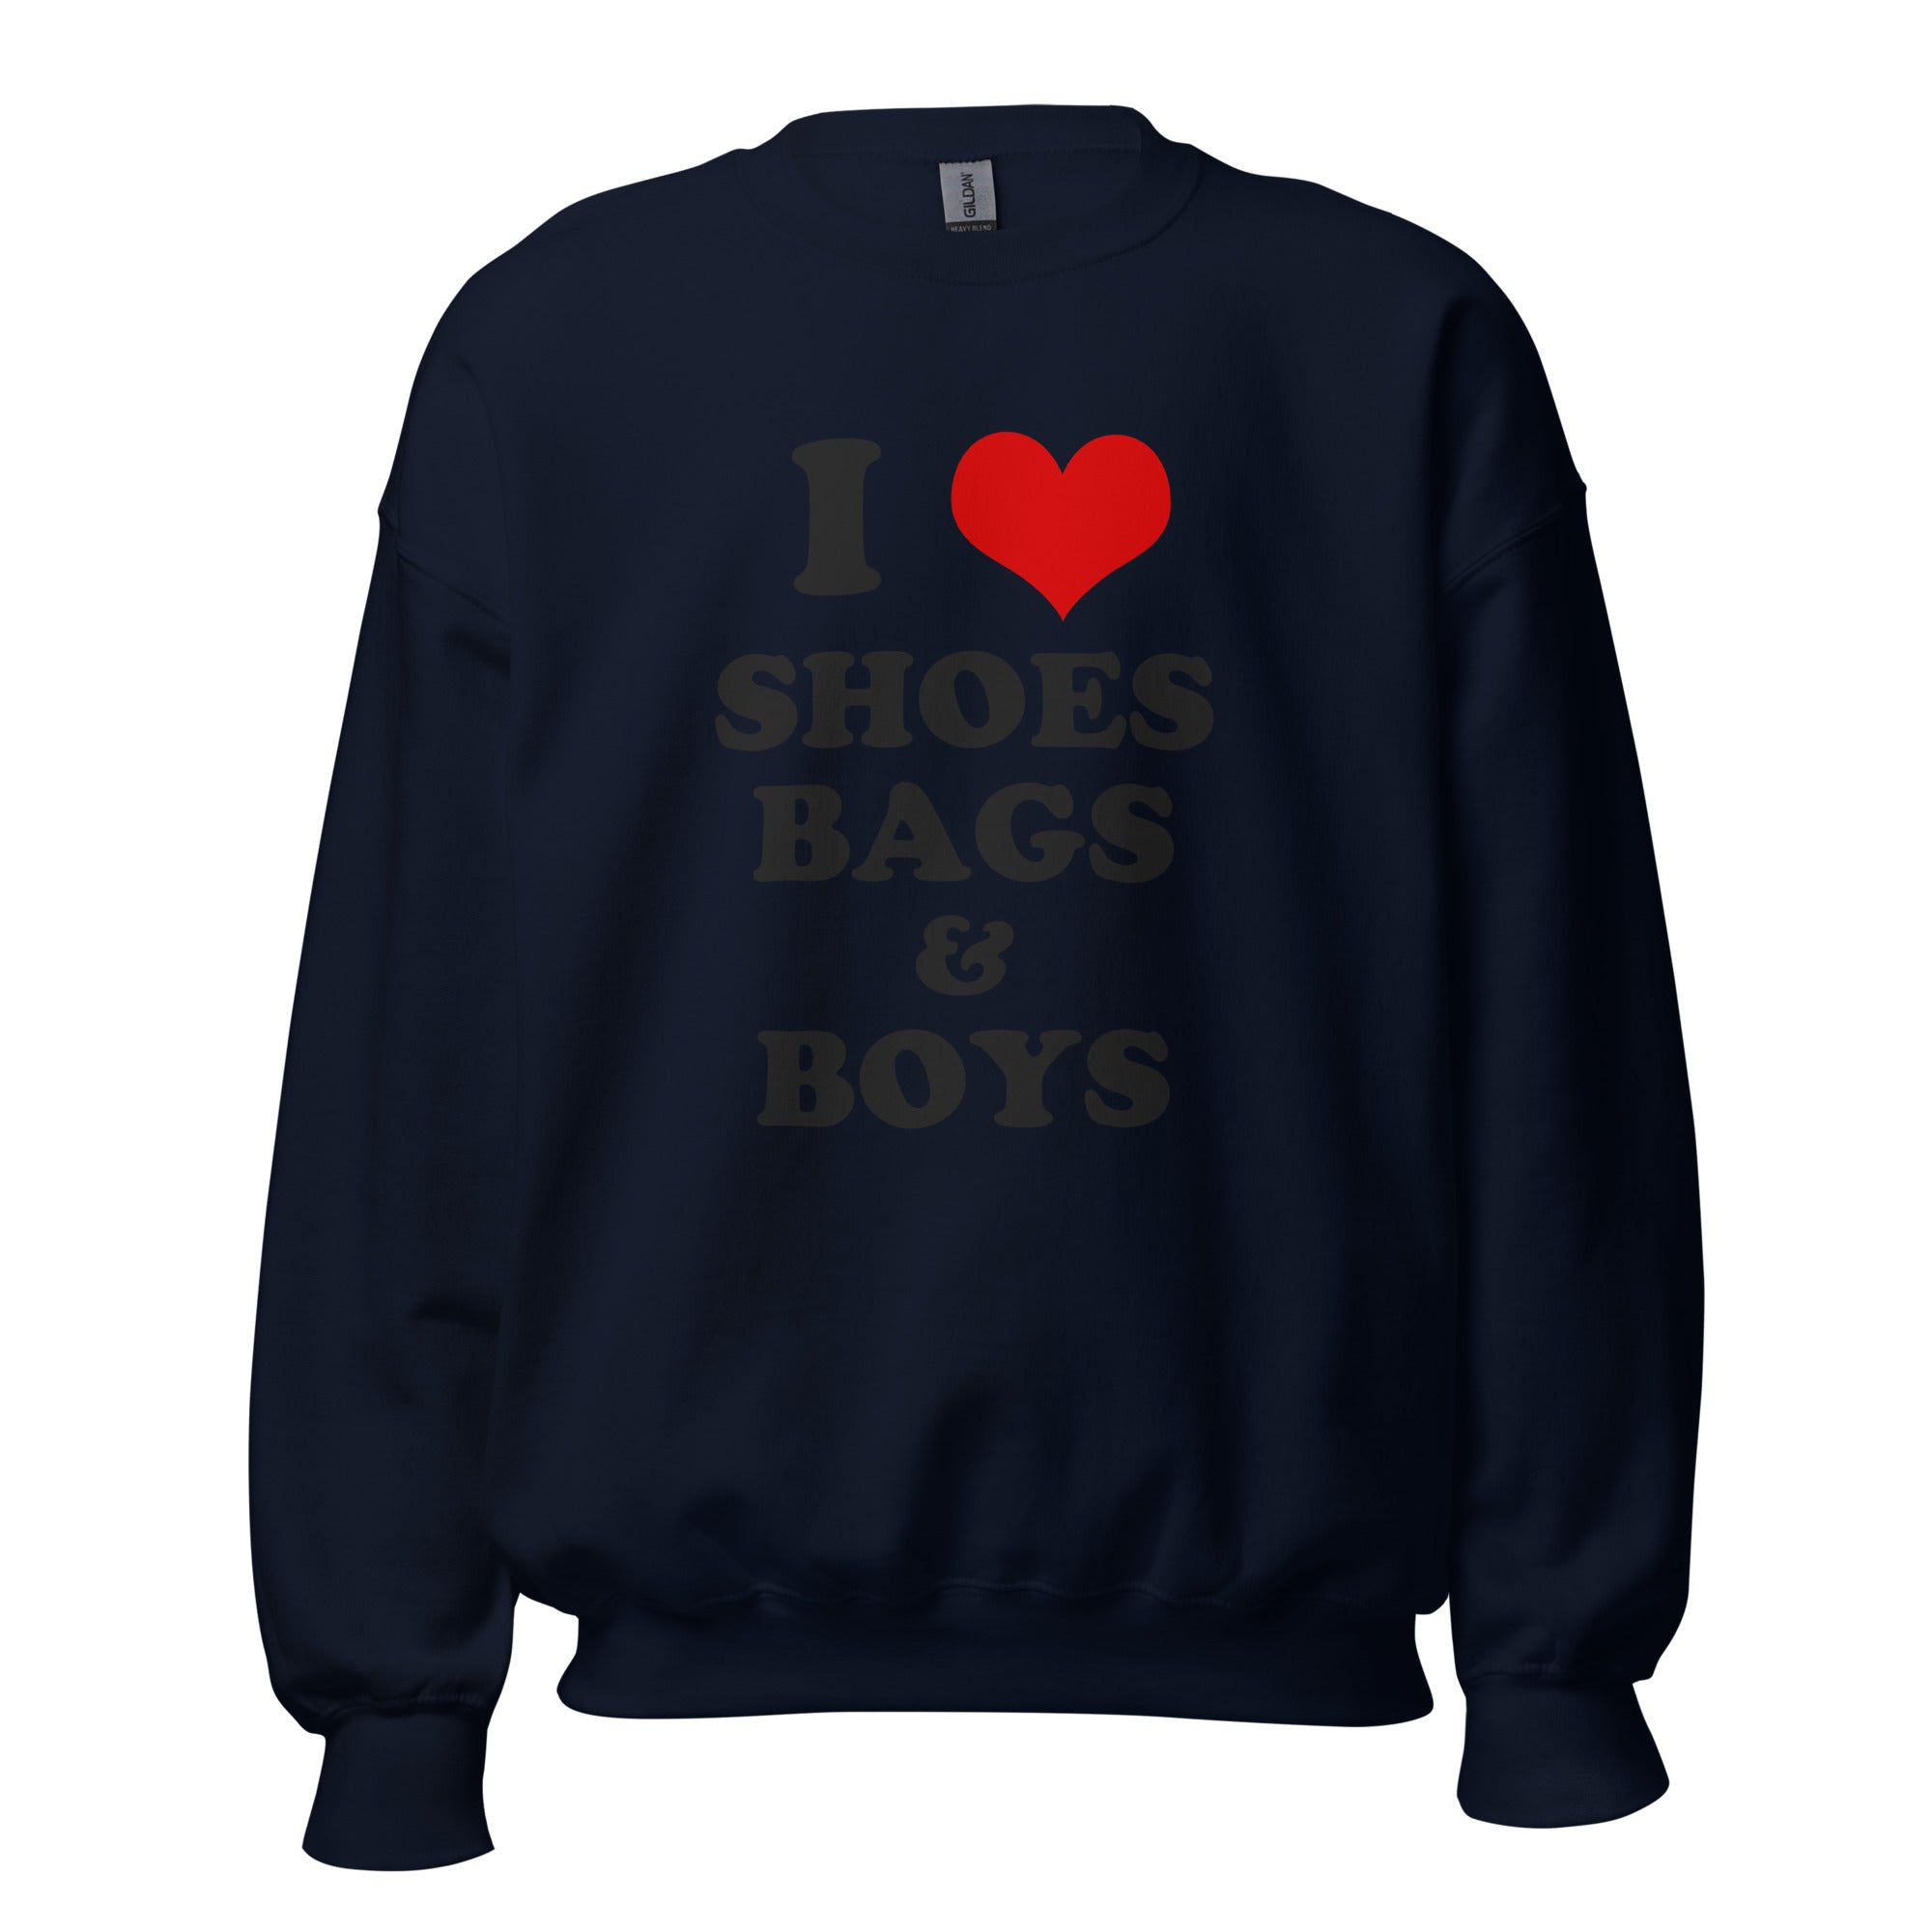 Women's Crew Neck Sweatshirt - I Love Shoes Bags and Boys - GRAPHIC T-SHIRTS